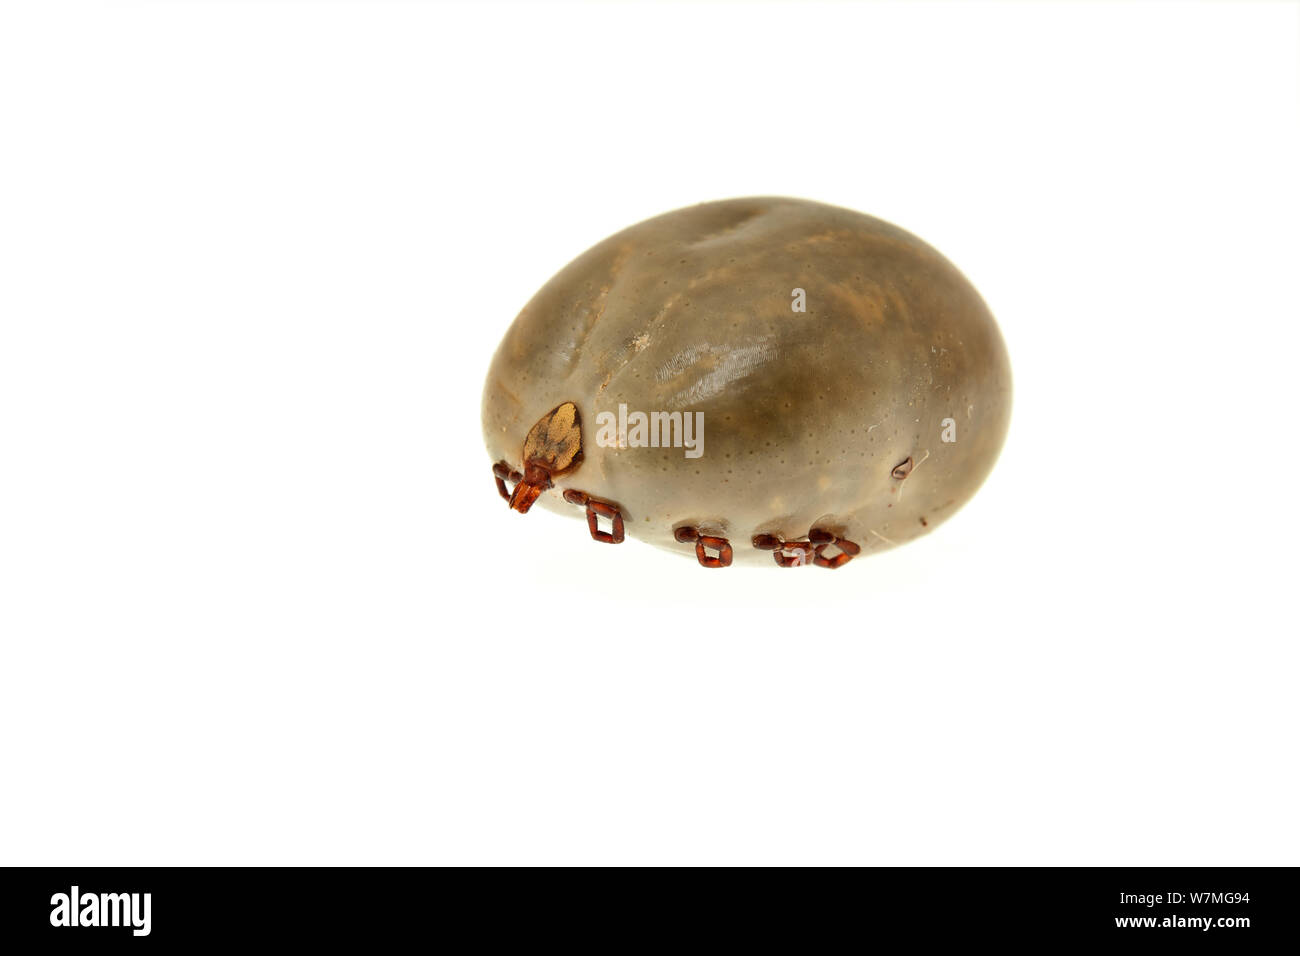 Female tick (Ixodes sp) engorged with blood, urban, Piedade, Sao Paulo, Brazil, May.  meetyourneighbours.net project Stock Photo